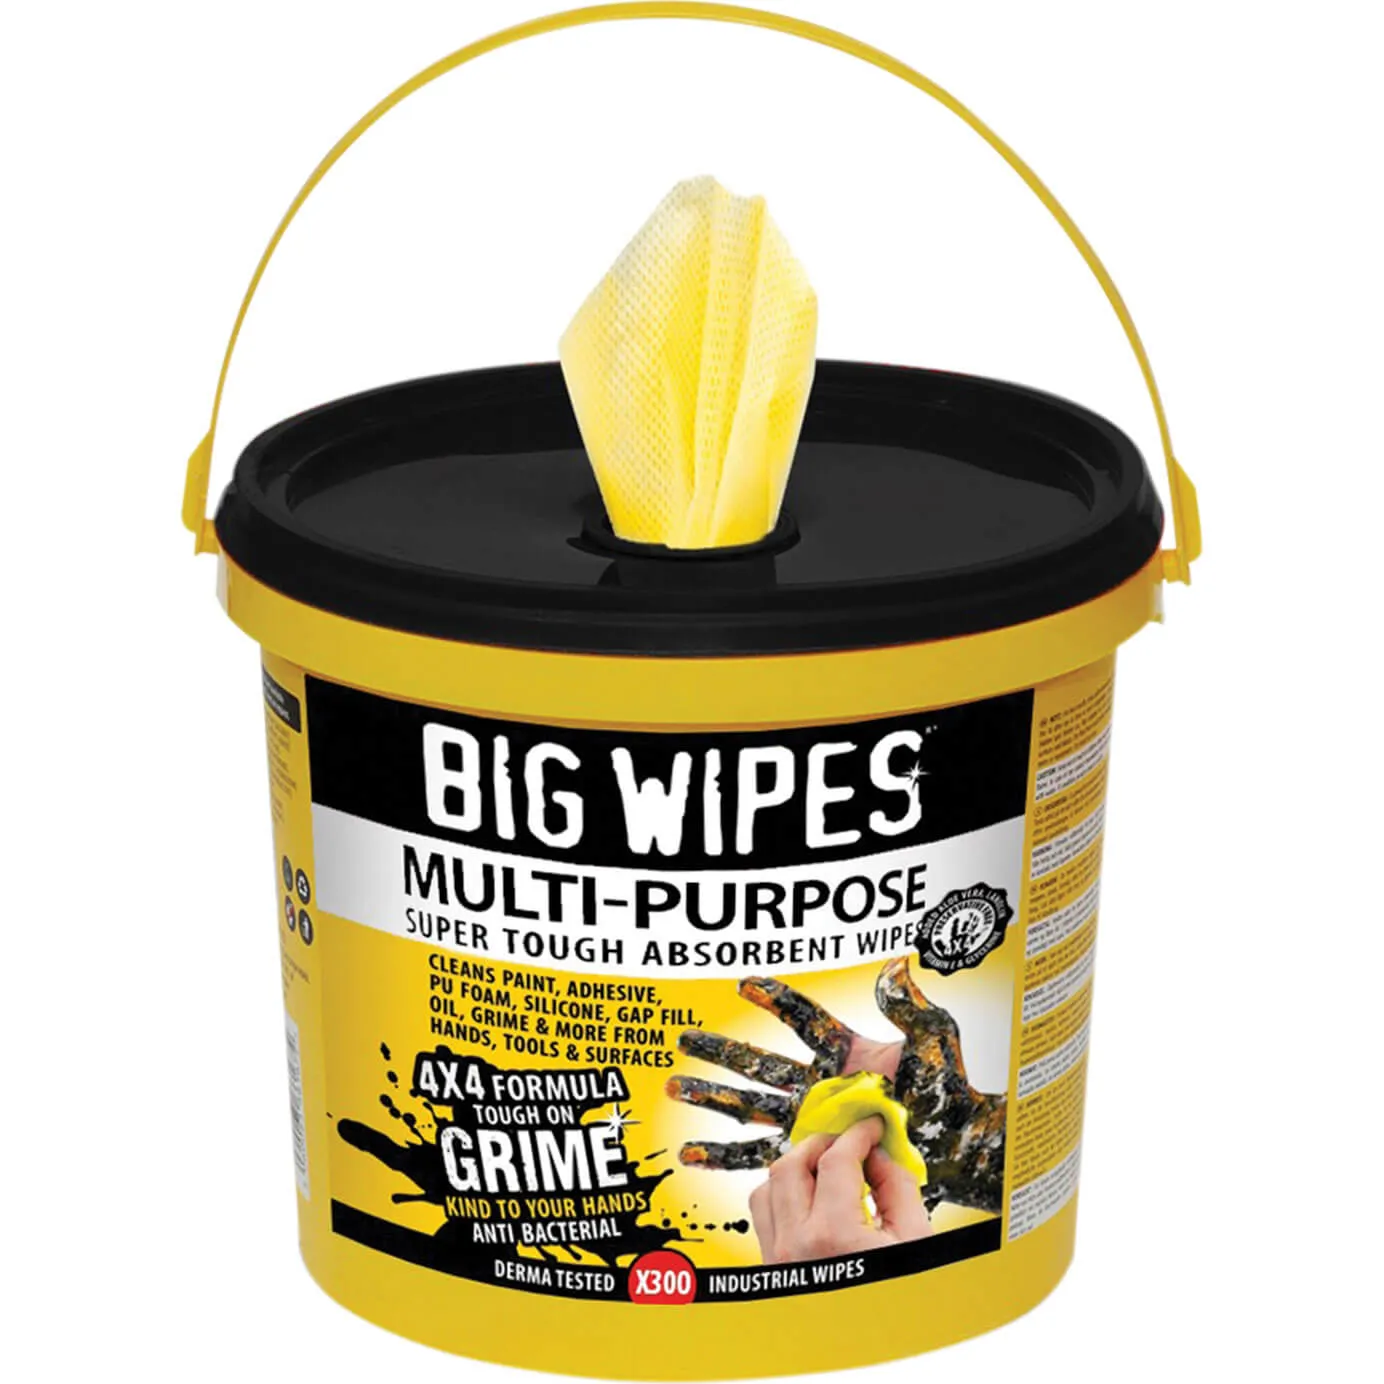 Big Wipes 4X4 Multi-Purpose Cleaning Wipes - Pack of 300